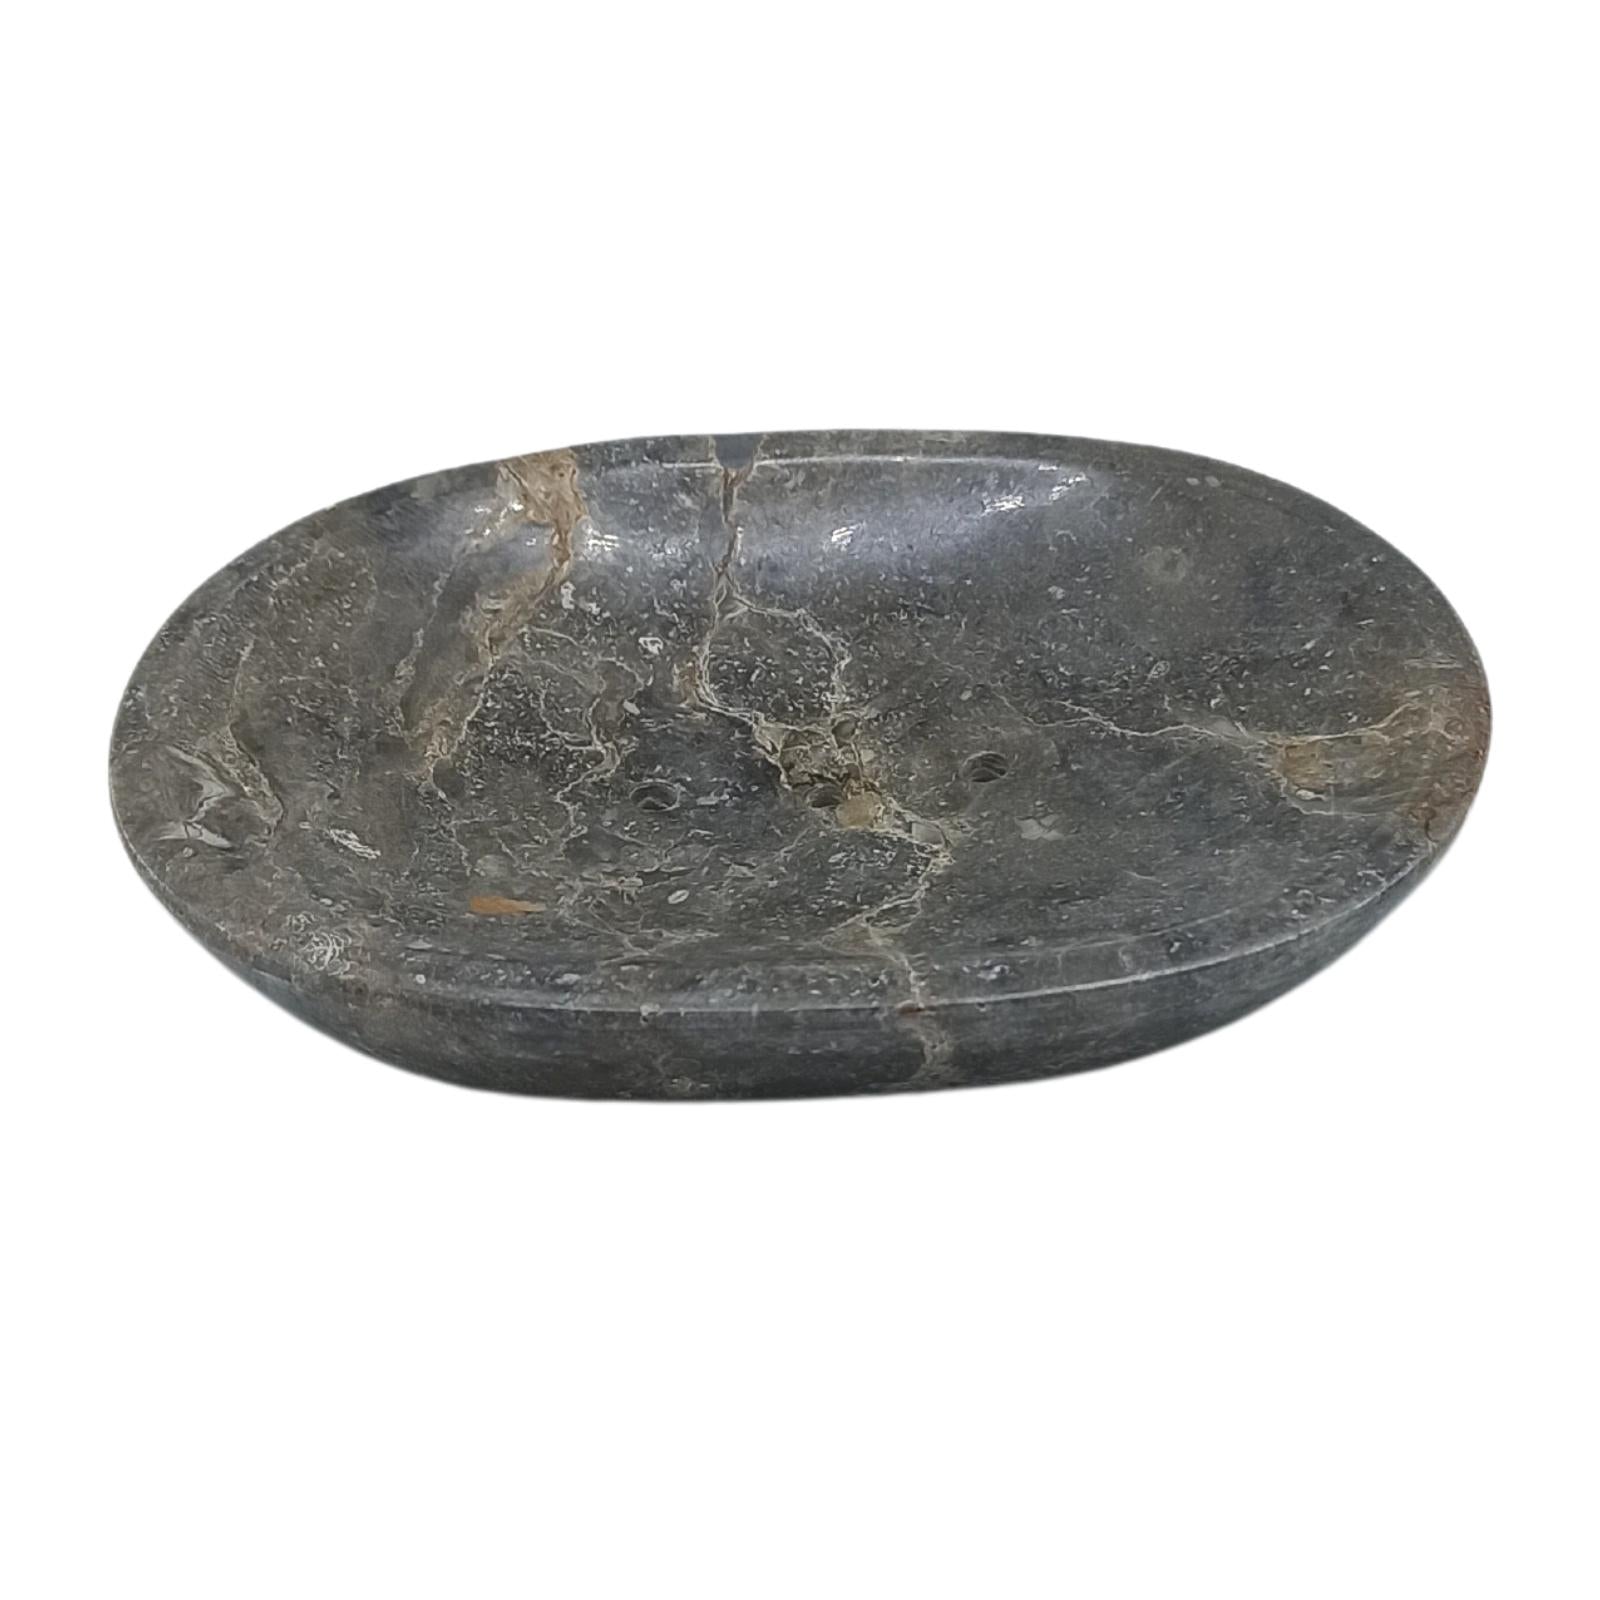 View Classic Oval Grey Marble Soap Dish information